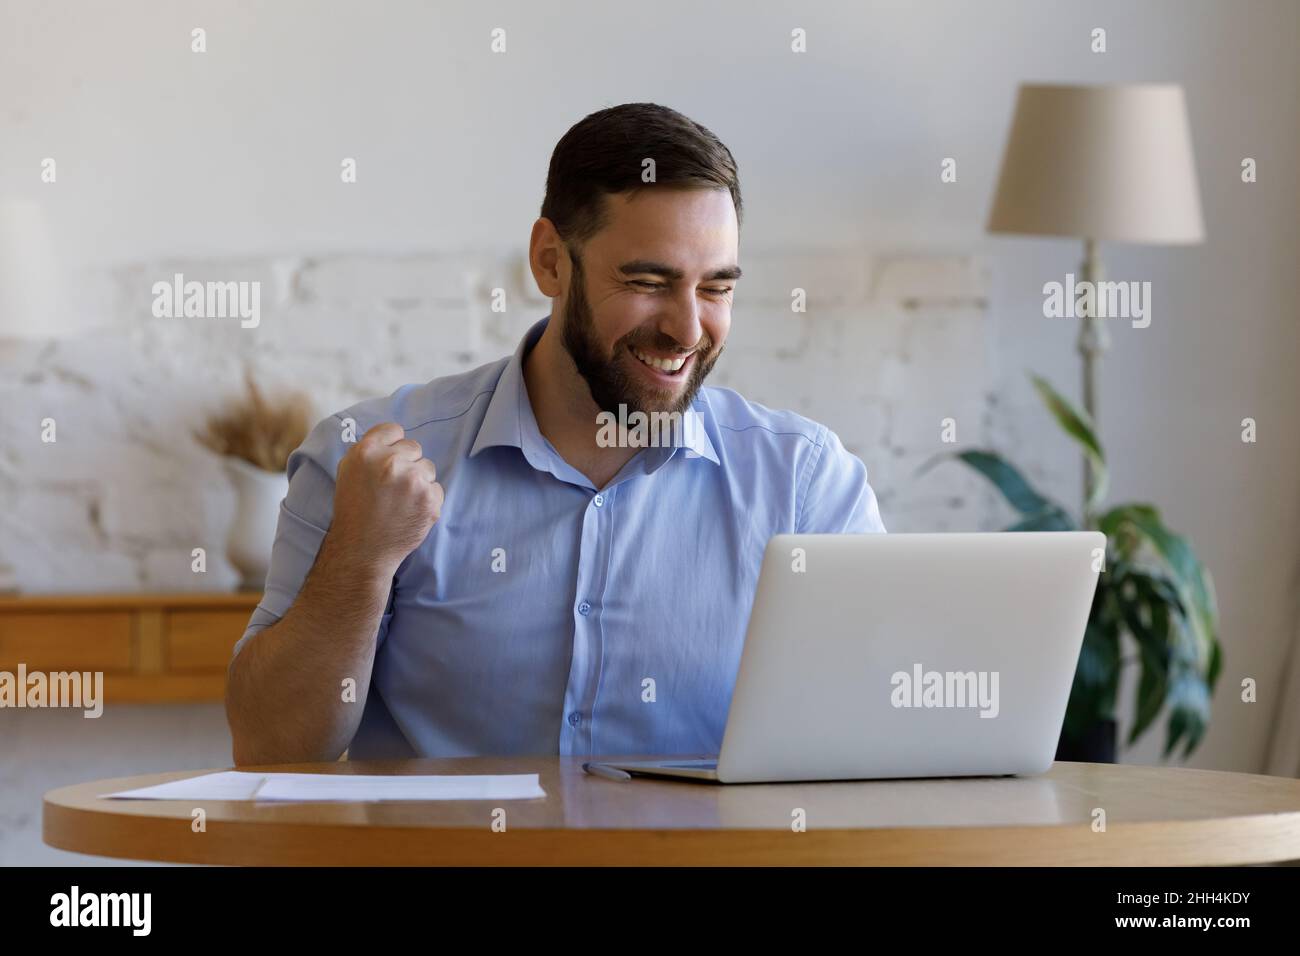 Excited happy guy getting good news, looking at laptop display Stock Photo